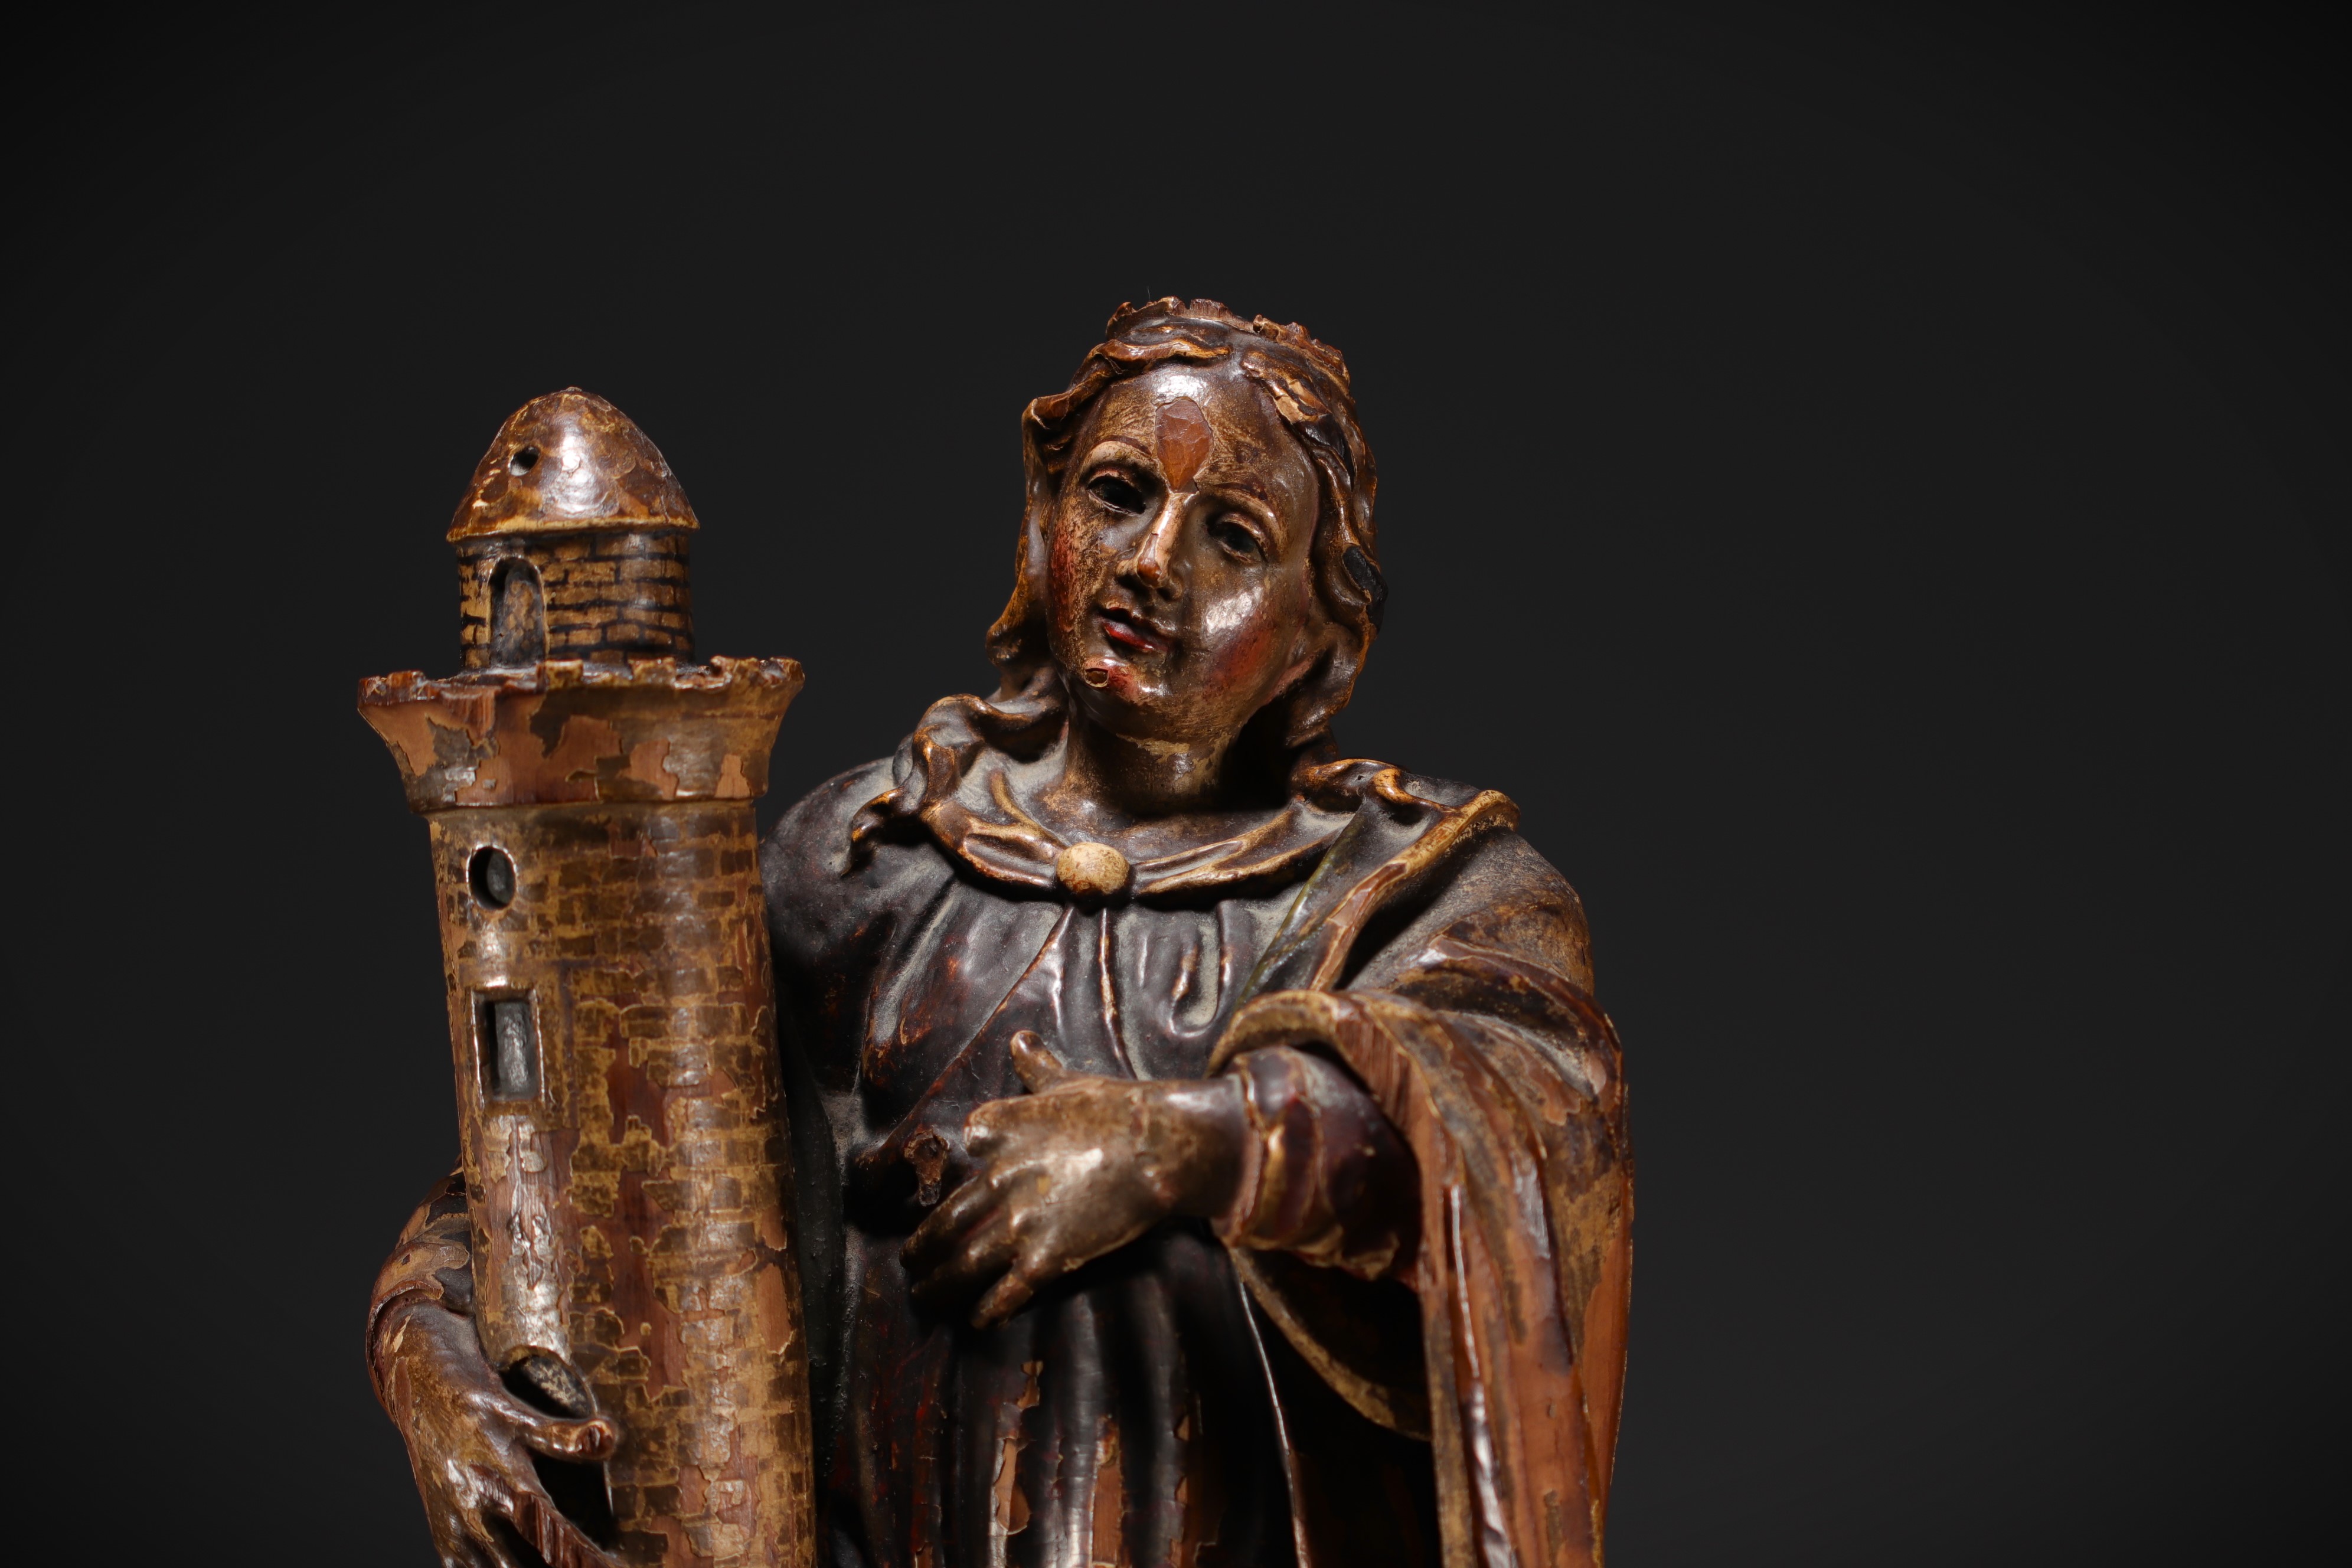 Statue de Sainte-Barbe - polychrome wooden sculpture from 18th century. - Image 3 of 4